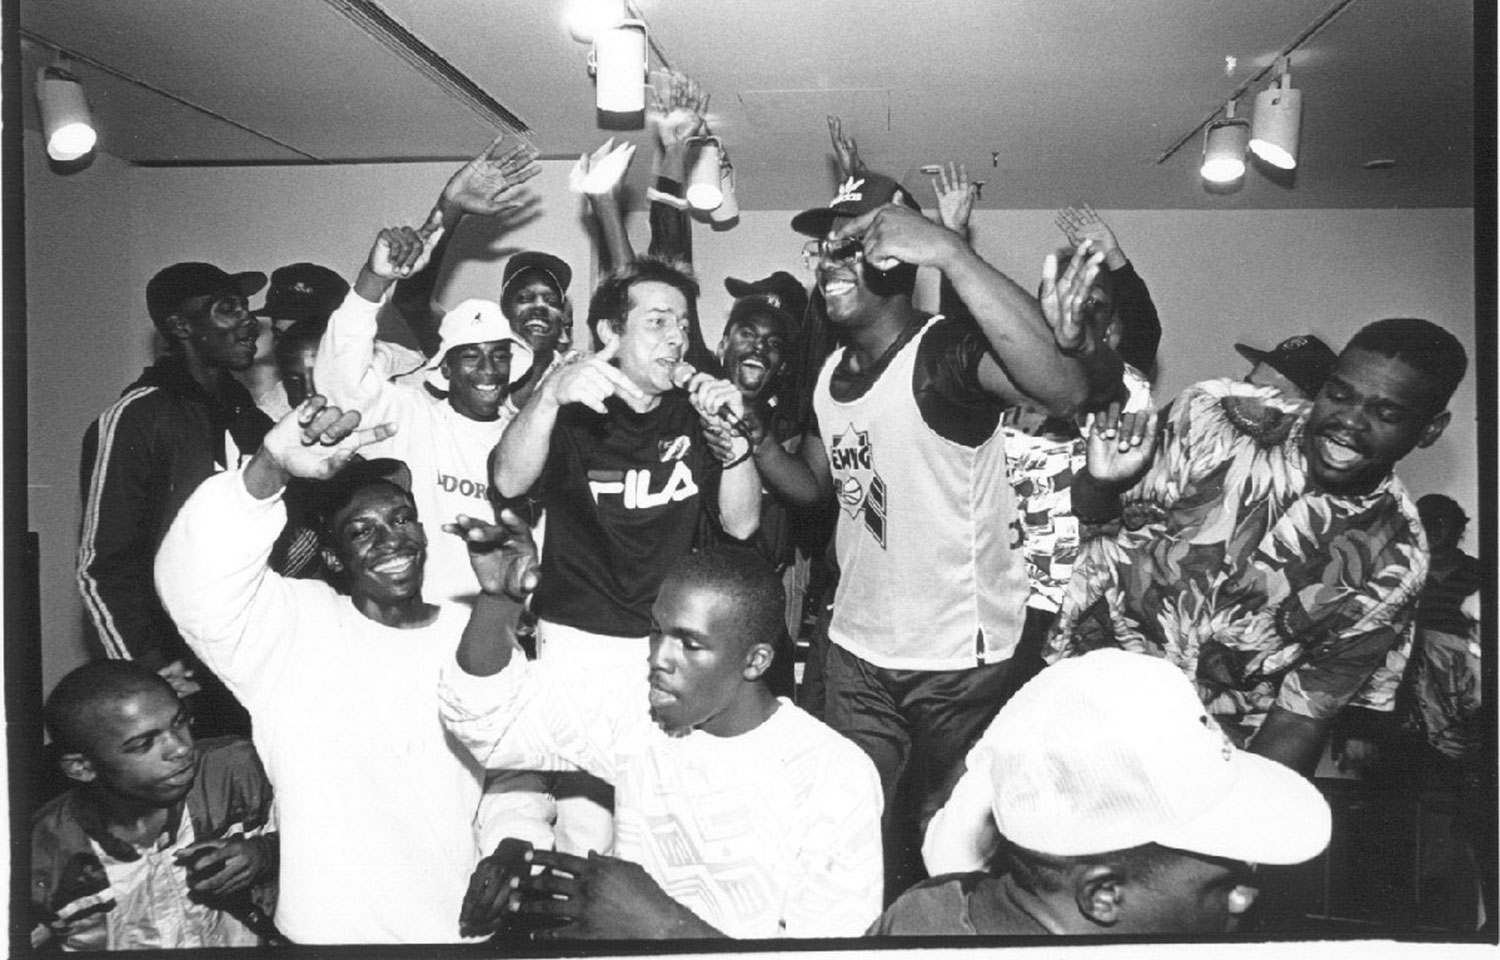 Magnus Johnstone (center) and friends at Boston's Institute of Contemporary Art for a show, c. 1987. (Courtesy Massachusetts Hip-Hop Archive)